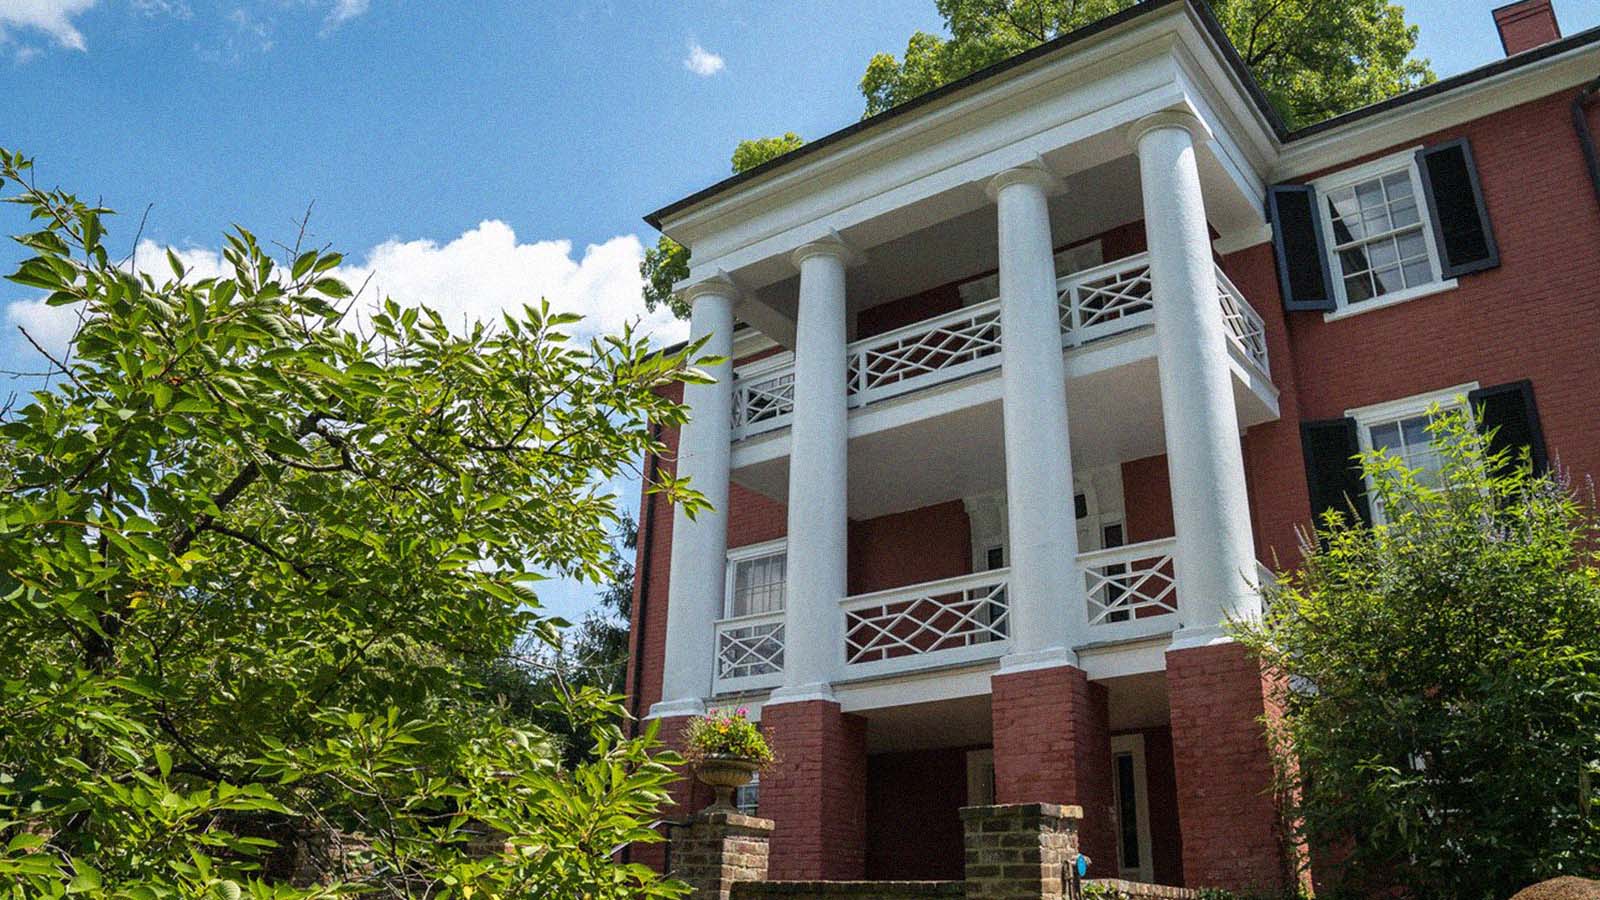 A historic home made of red brick and white columns stands tall. 